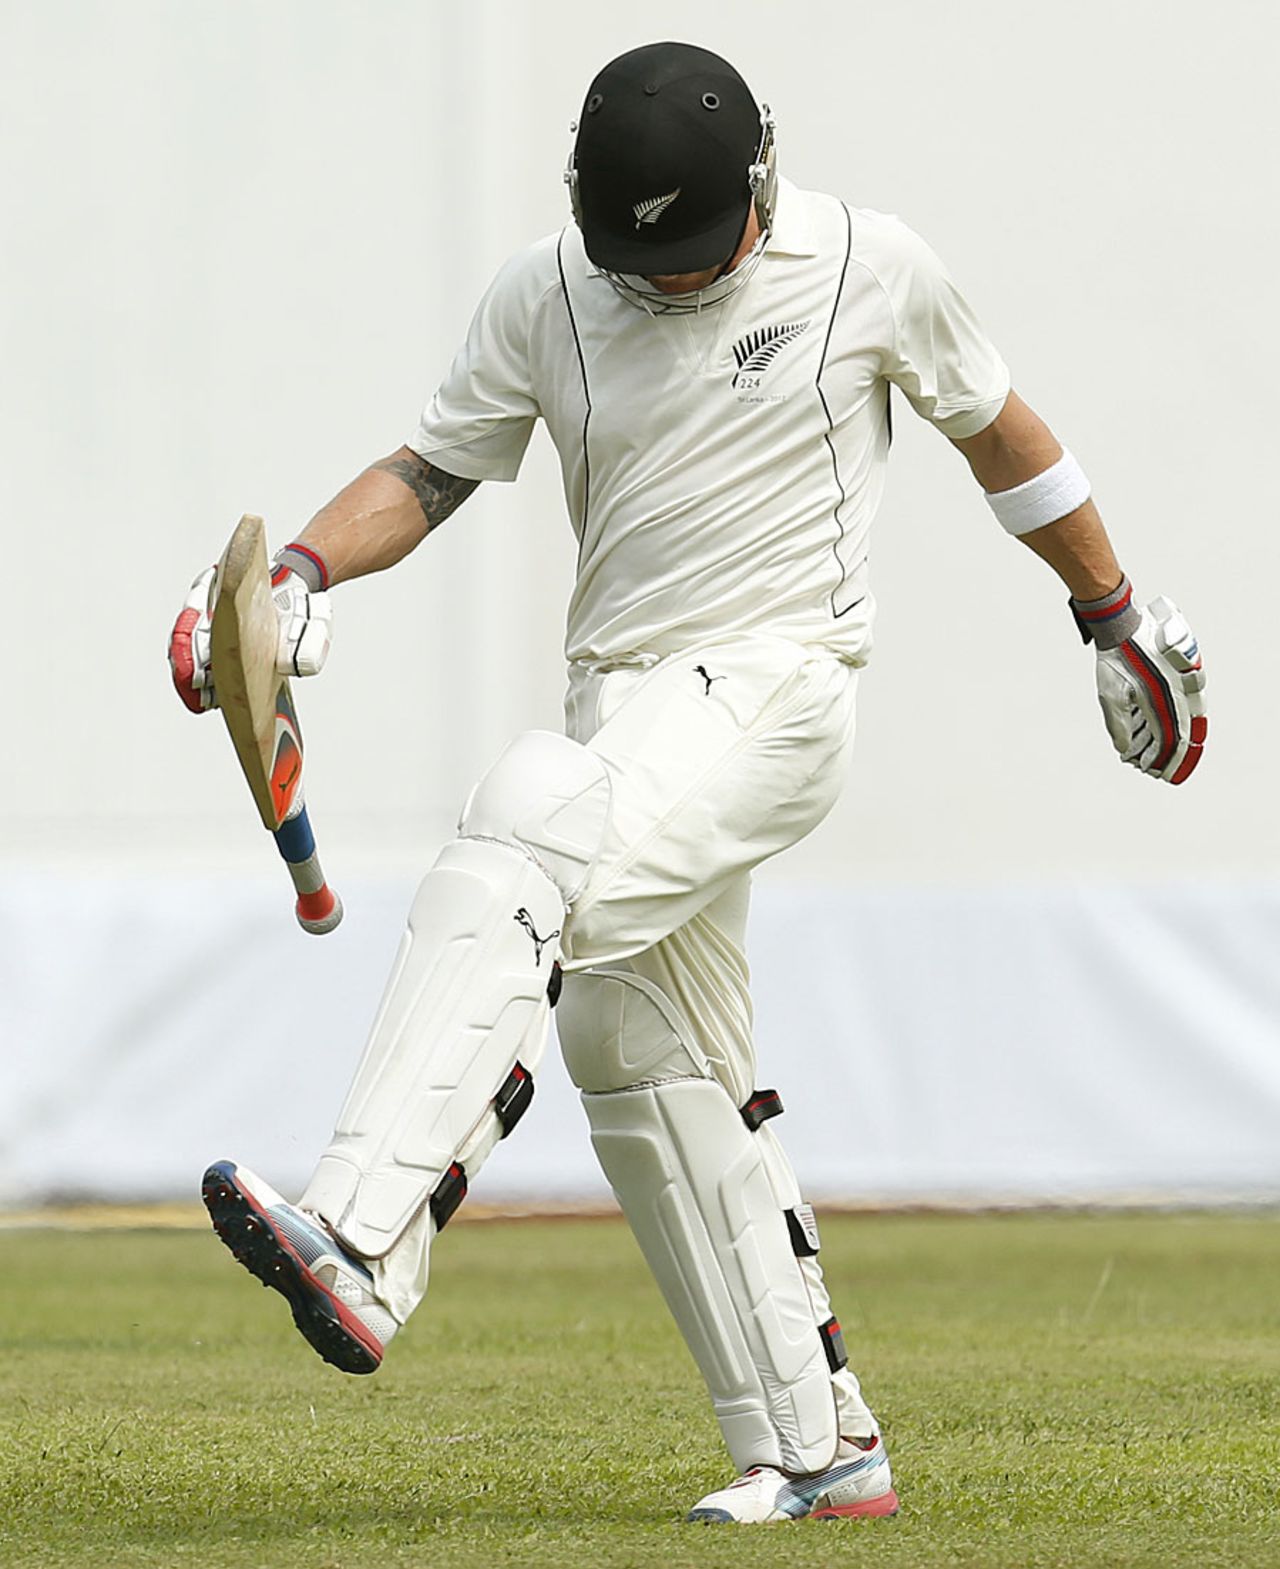 A frustrated Brendon McCullum walks back after getting a rough decision, Sri Lanka v New Zealand, 2nd Test, Colombo, 1st day, November 25, 2012